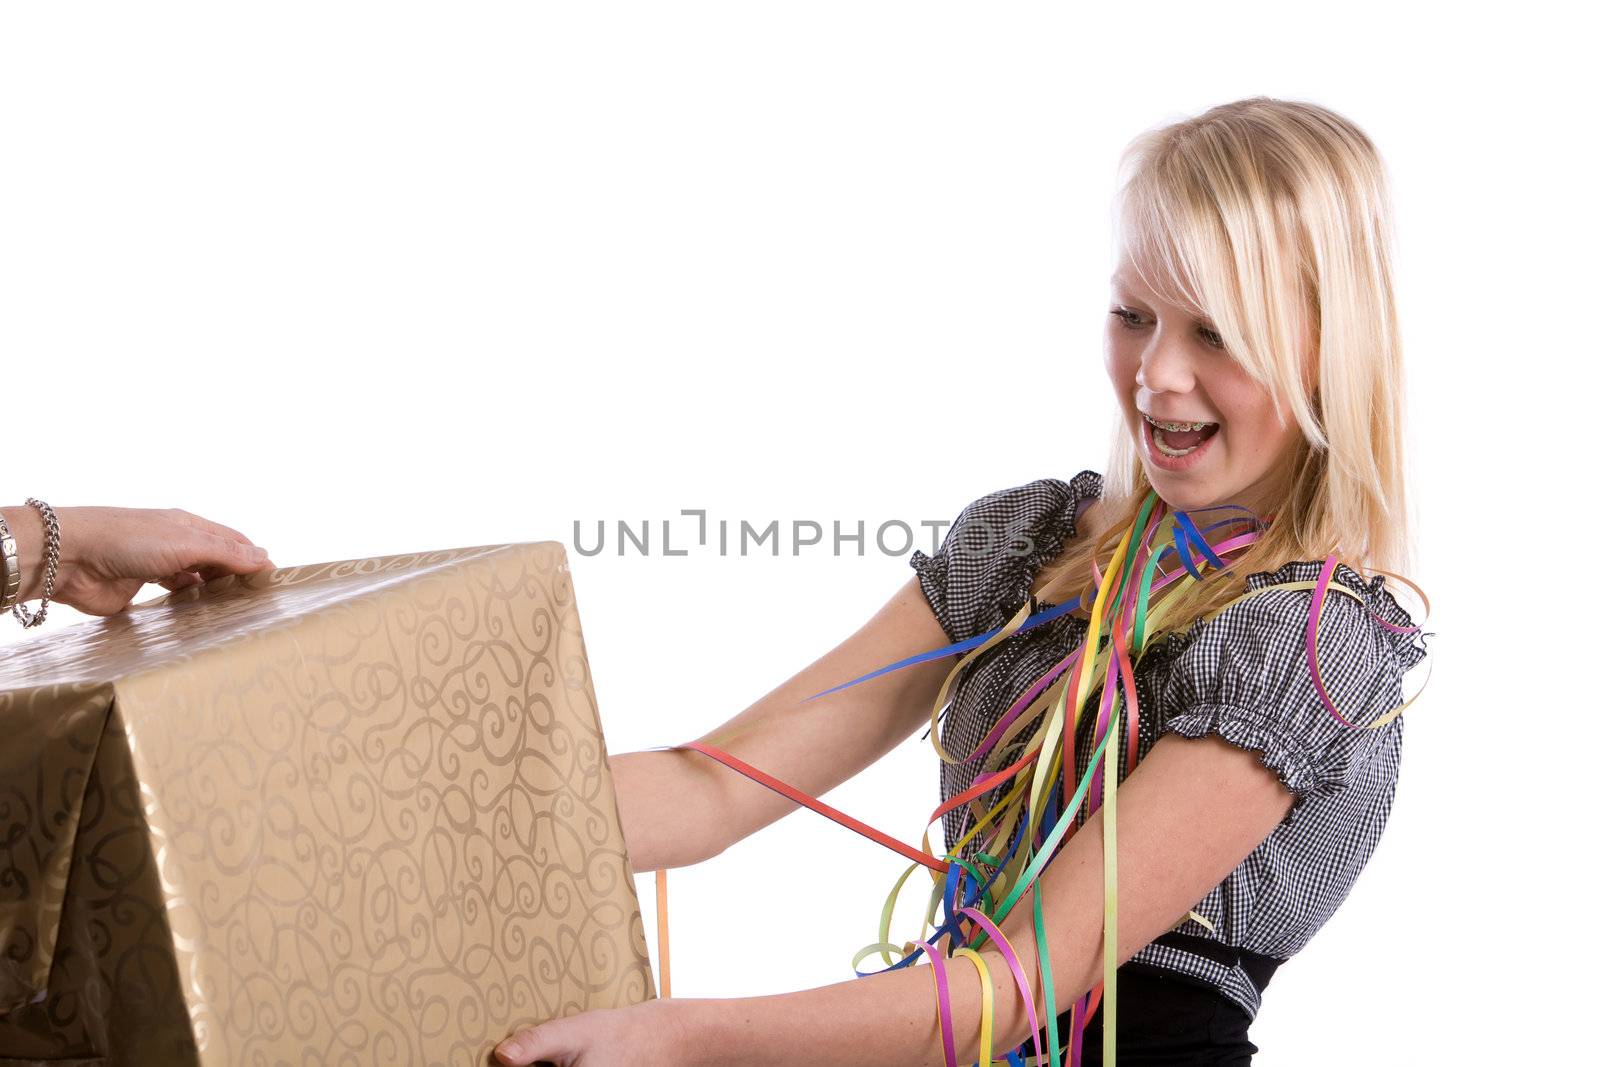 Young teenage girl getting a big box for a present